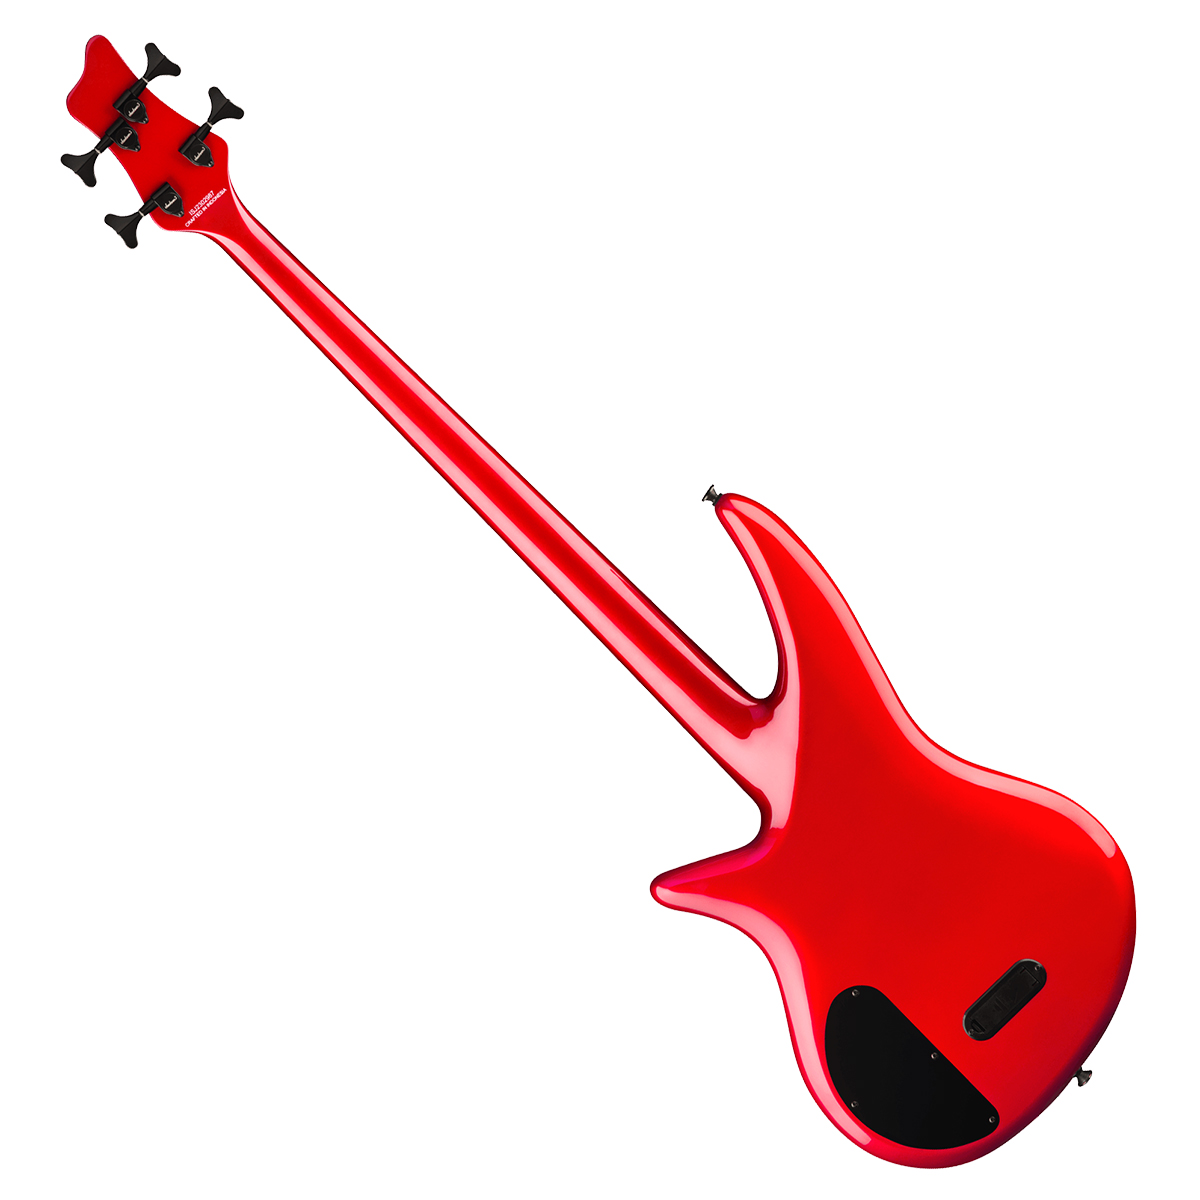 Jackson X Series Spectra Bass SBX IV Candy Apple Red エレキベース 